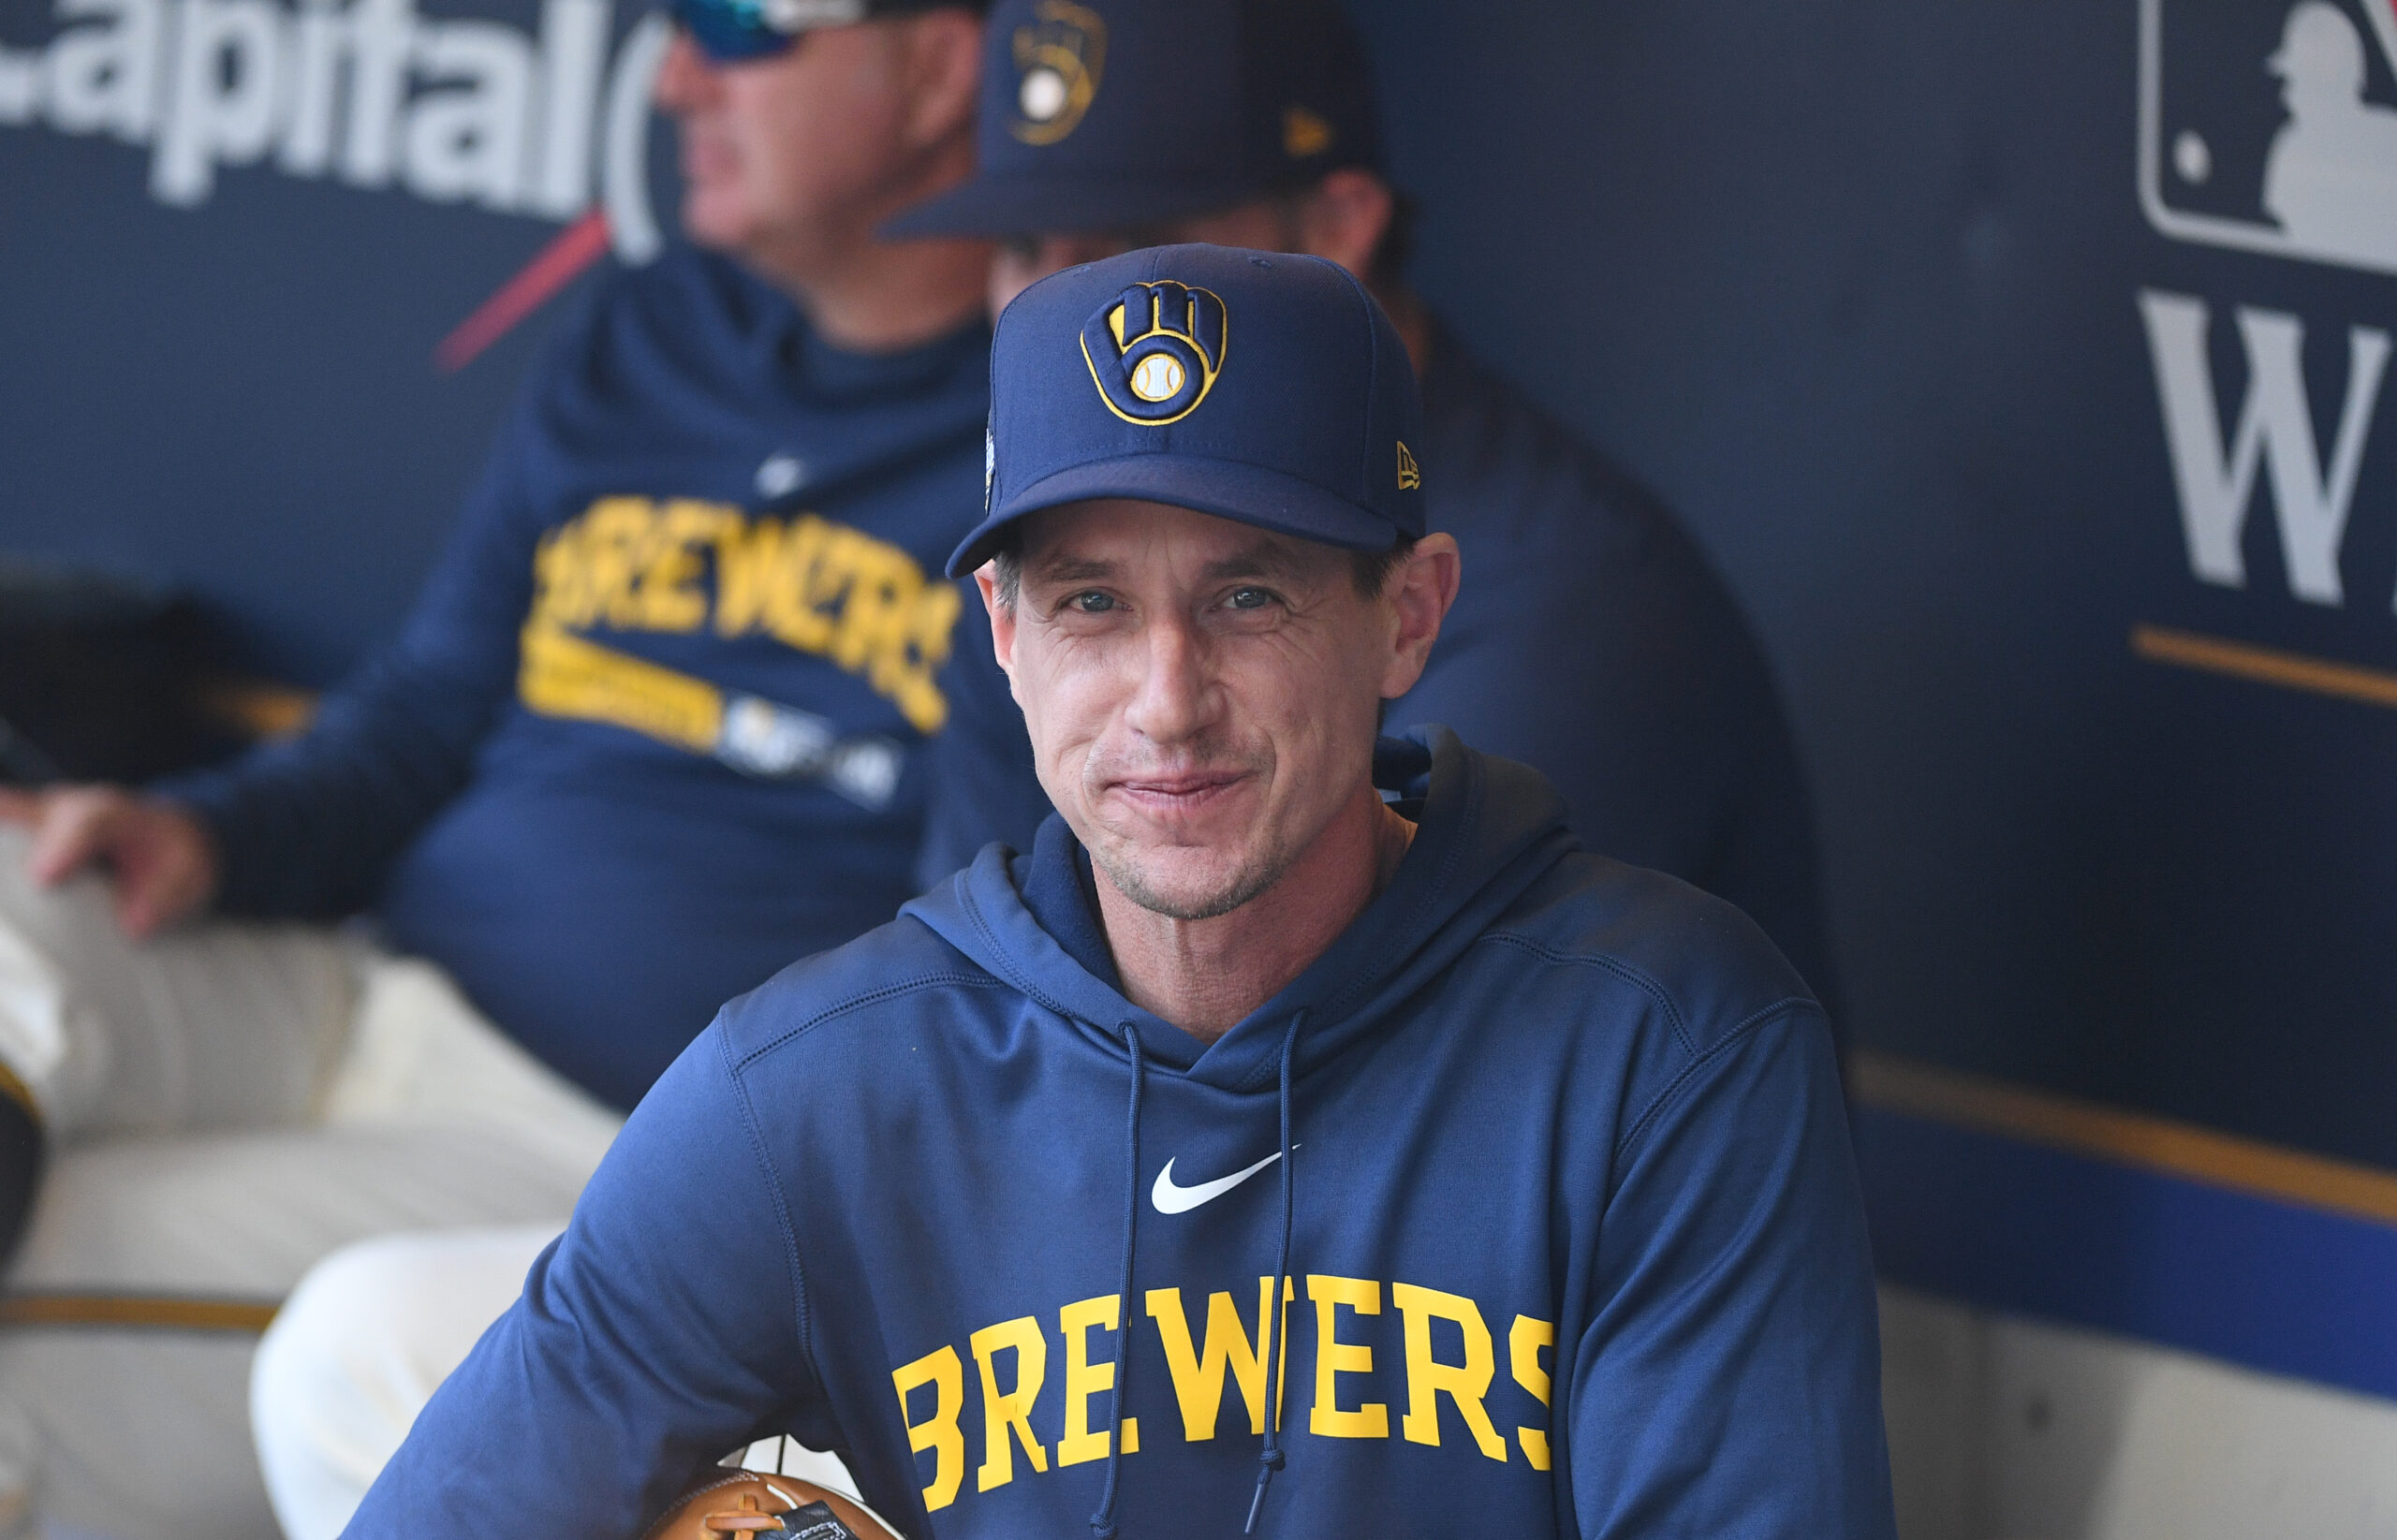 Brewers Manager Craig Counsell's Response to Diamondbacks' Win